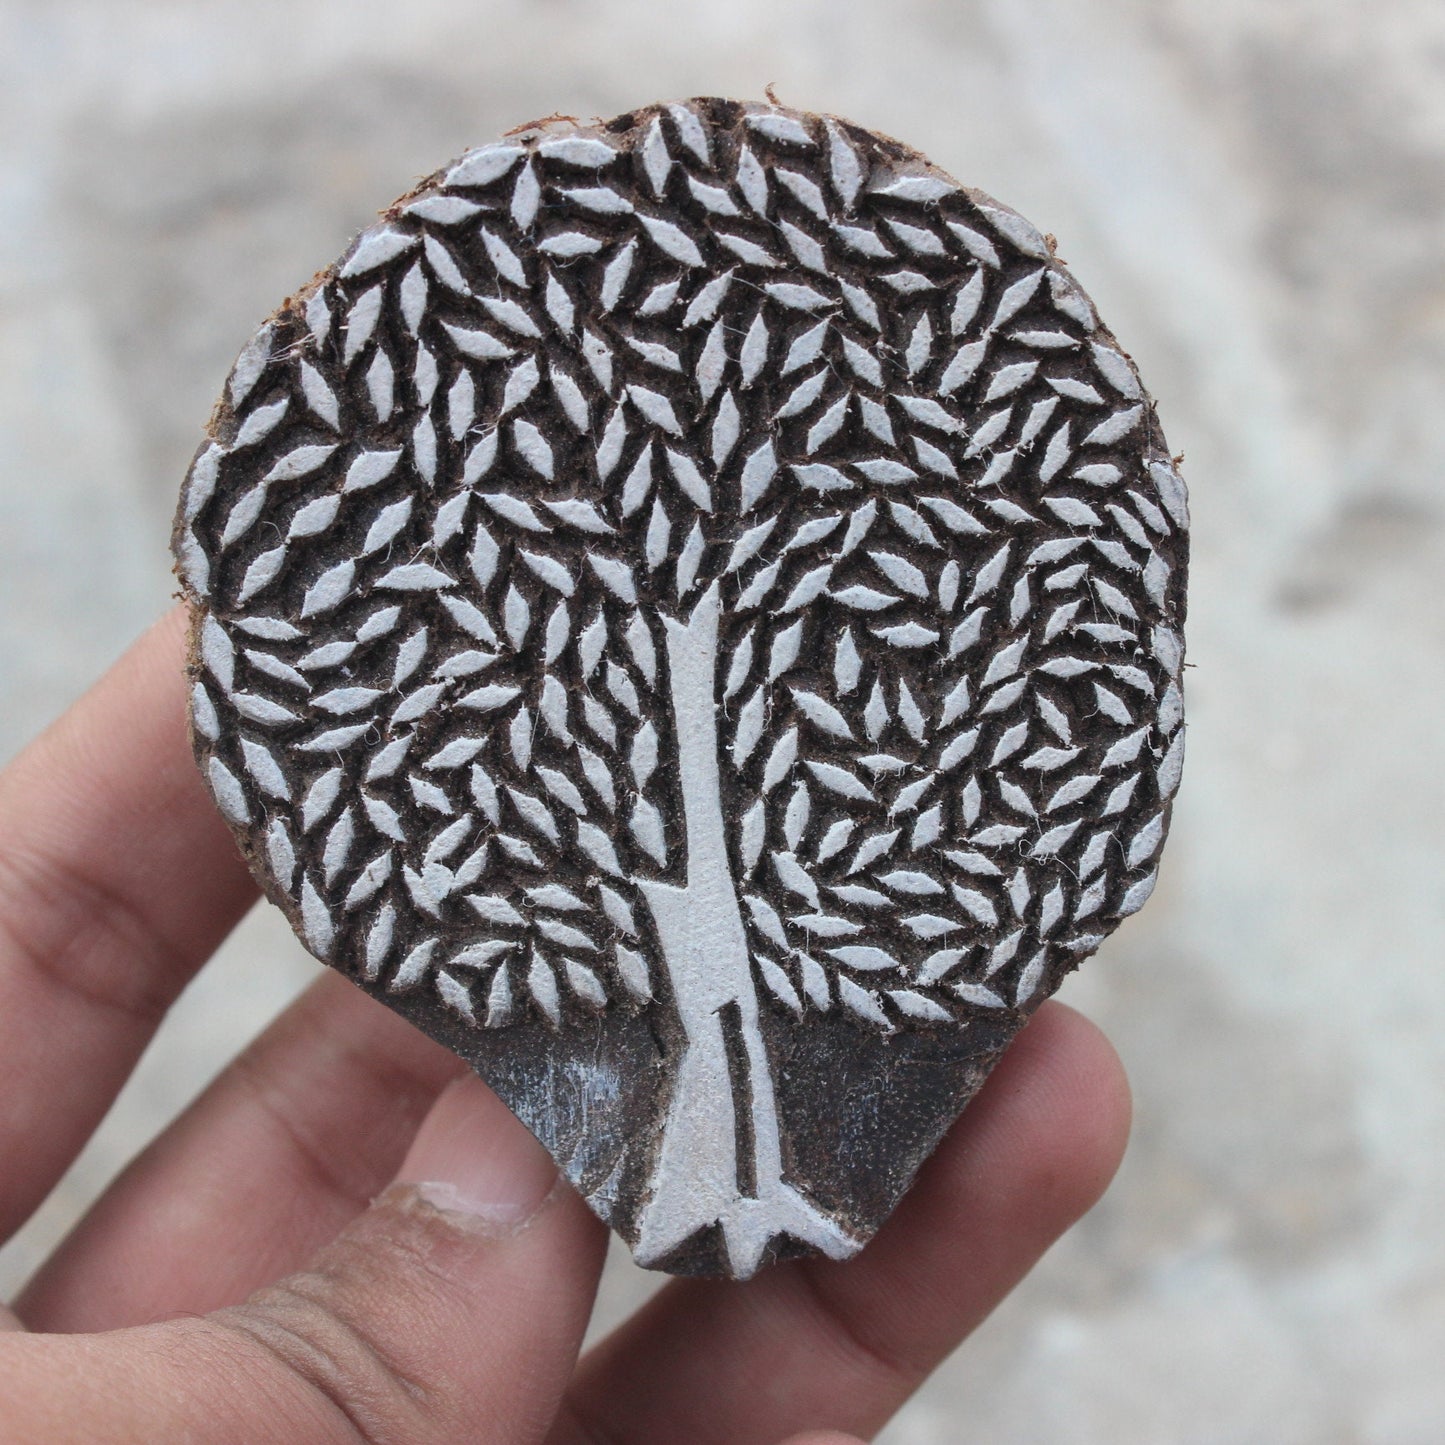 Hand Carve Soap Stamp Tree Of Life Wood Block Print Stamp Tree Print Stamp Indian Block Print Stamp For Printing Carve Wooden Block Stamp